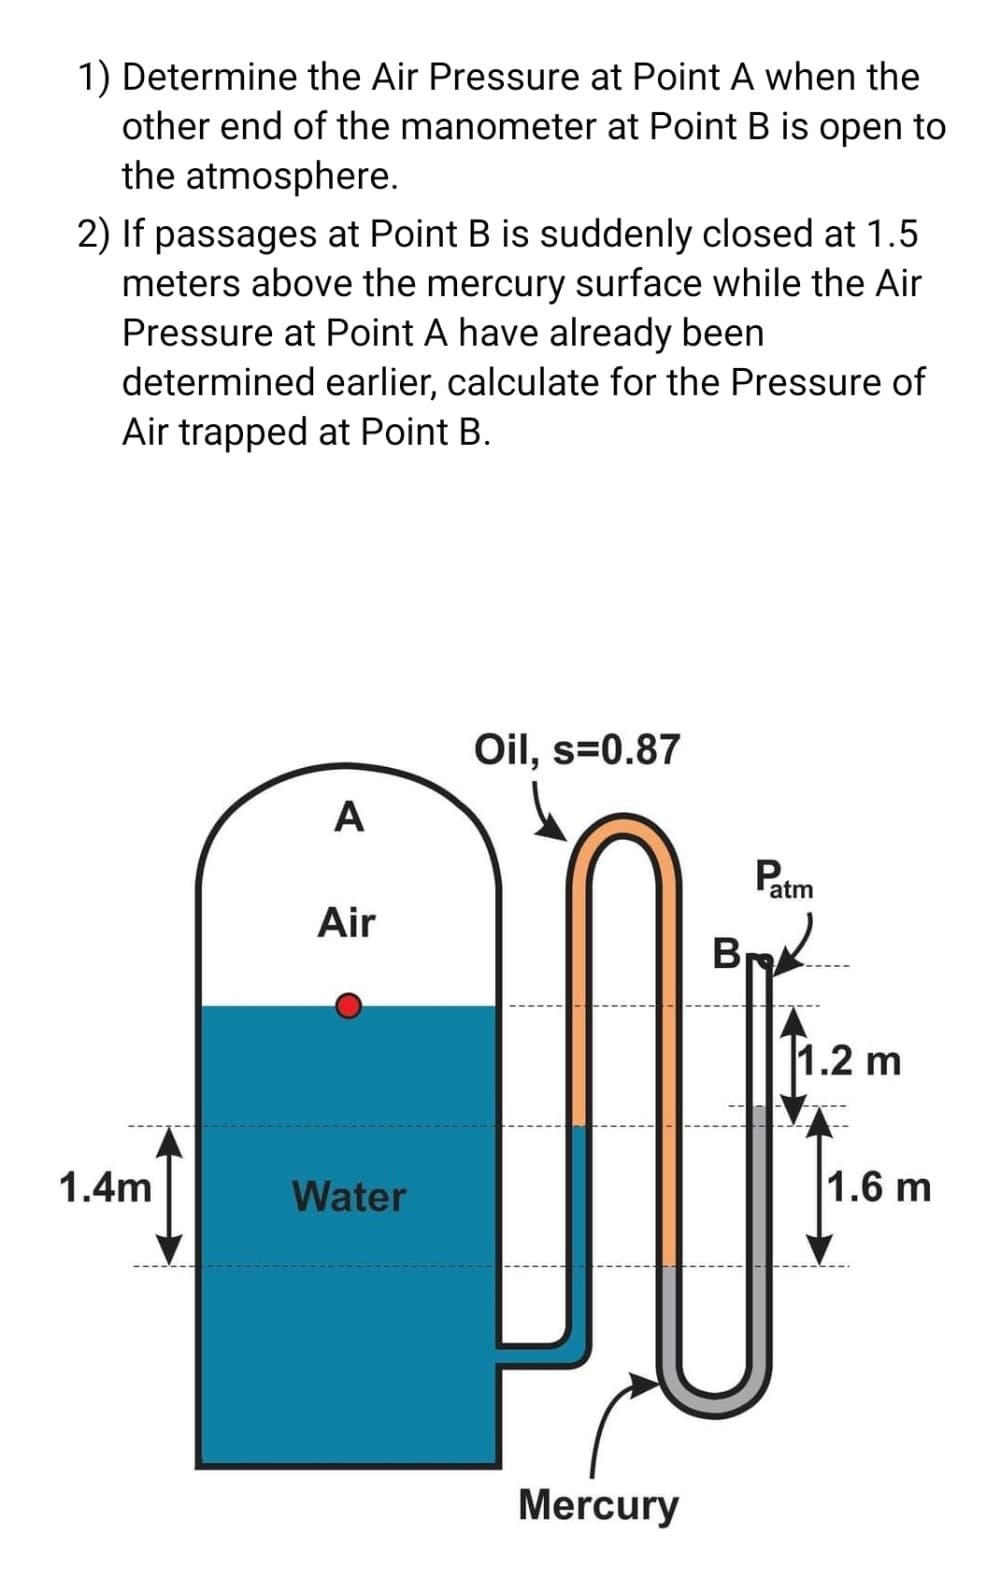 1) Determine the Air Pressure at Point A when the
other end of the manometer at Point B is open to
the atmosphere.
2) If passages at Point B is suddenly closed at 1.5
meters above the mercury surface while the Air
Pressure at Point A have already been
determined earlier, calculate for the Pressure of
Air trapped at Point B.
Oil, s=0.87
A
Patm
Air
Br
1.2 m
1.4m
Water
1.6 m
Mercury
